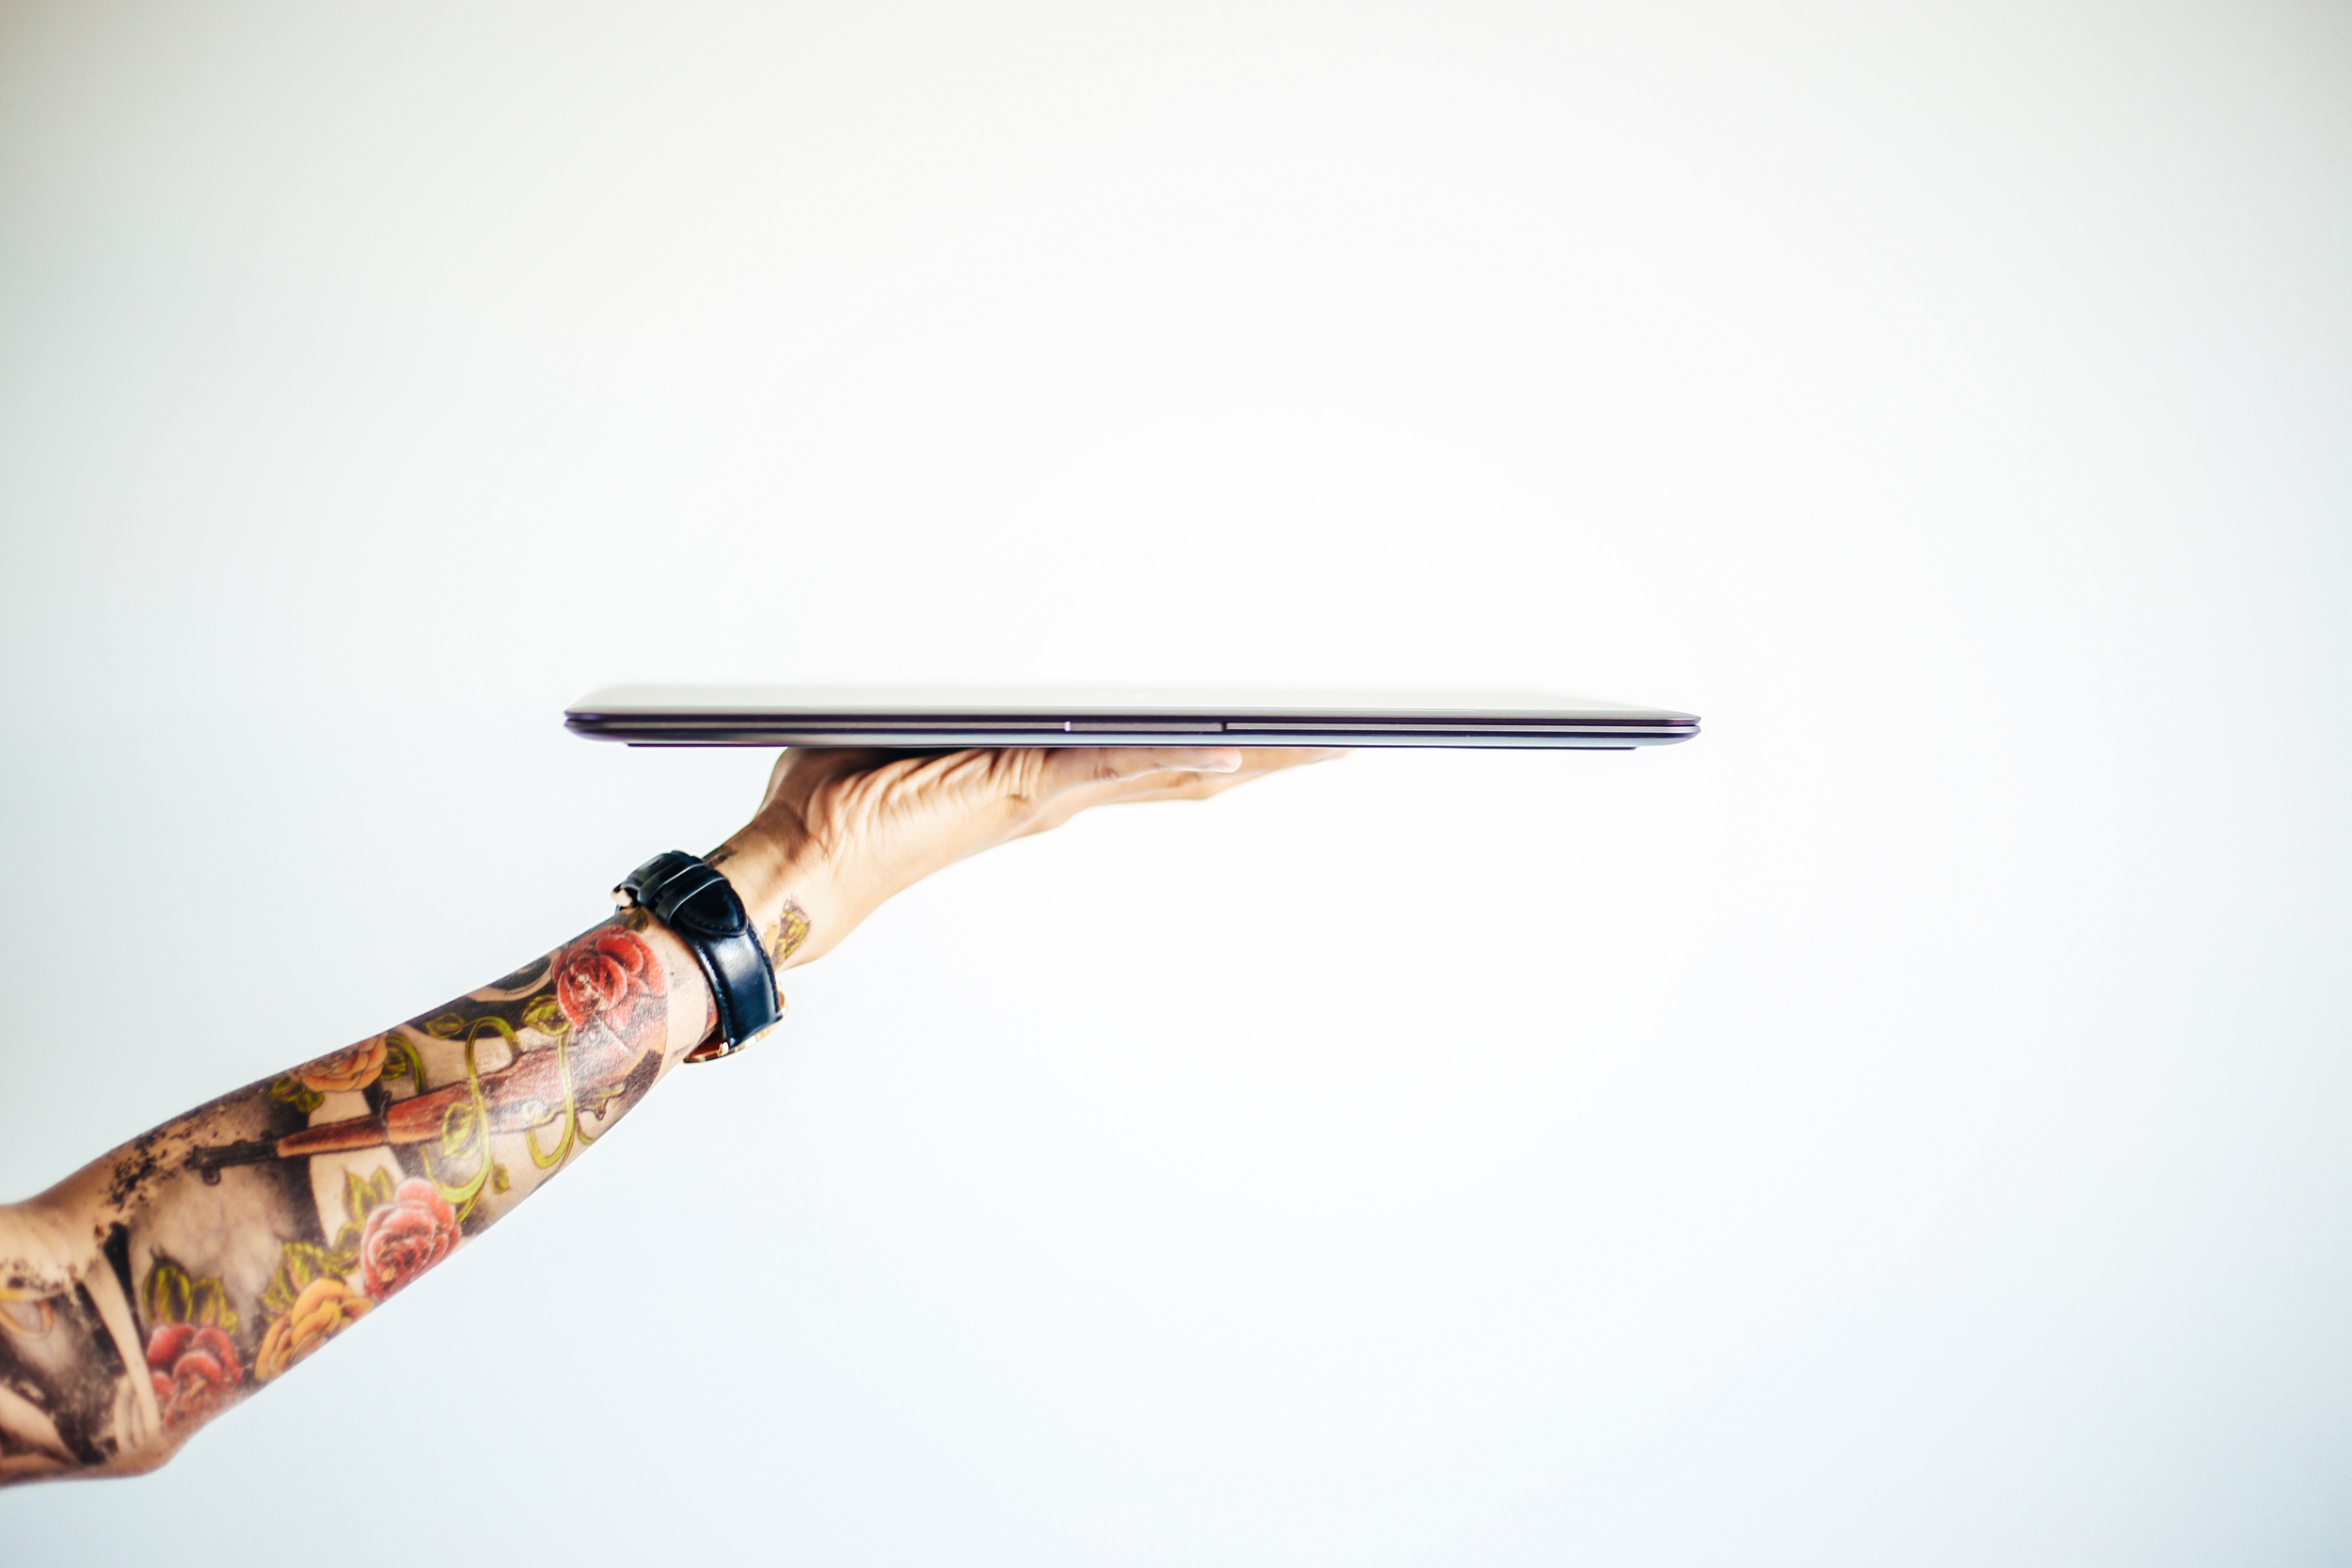 HP Spectre, the world's thinnest laptop, is way more than just thin